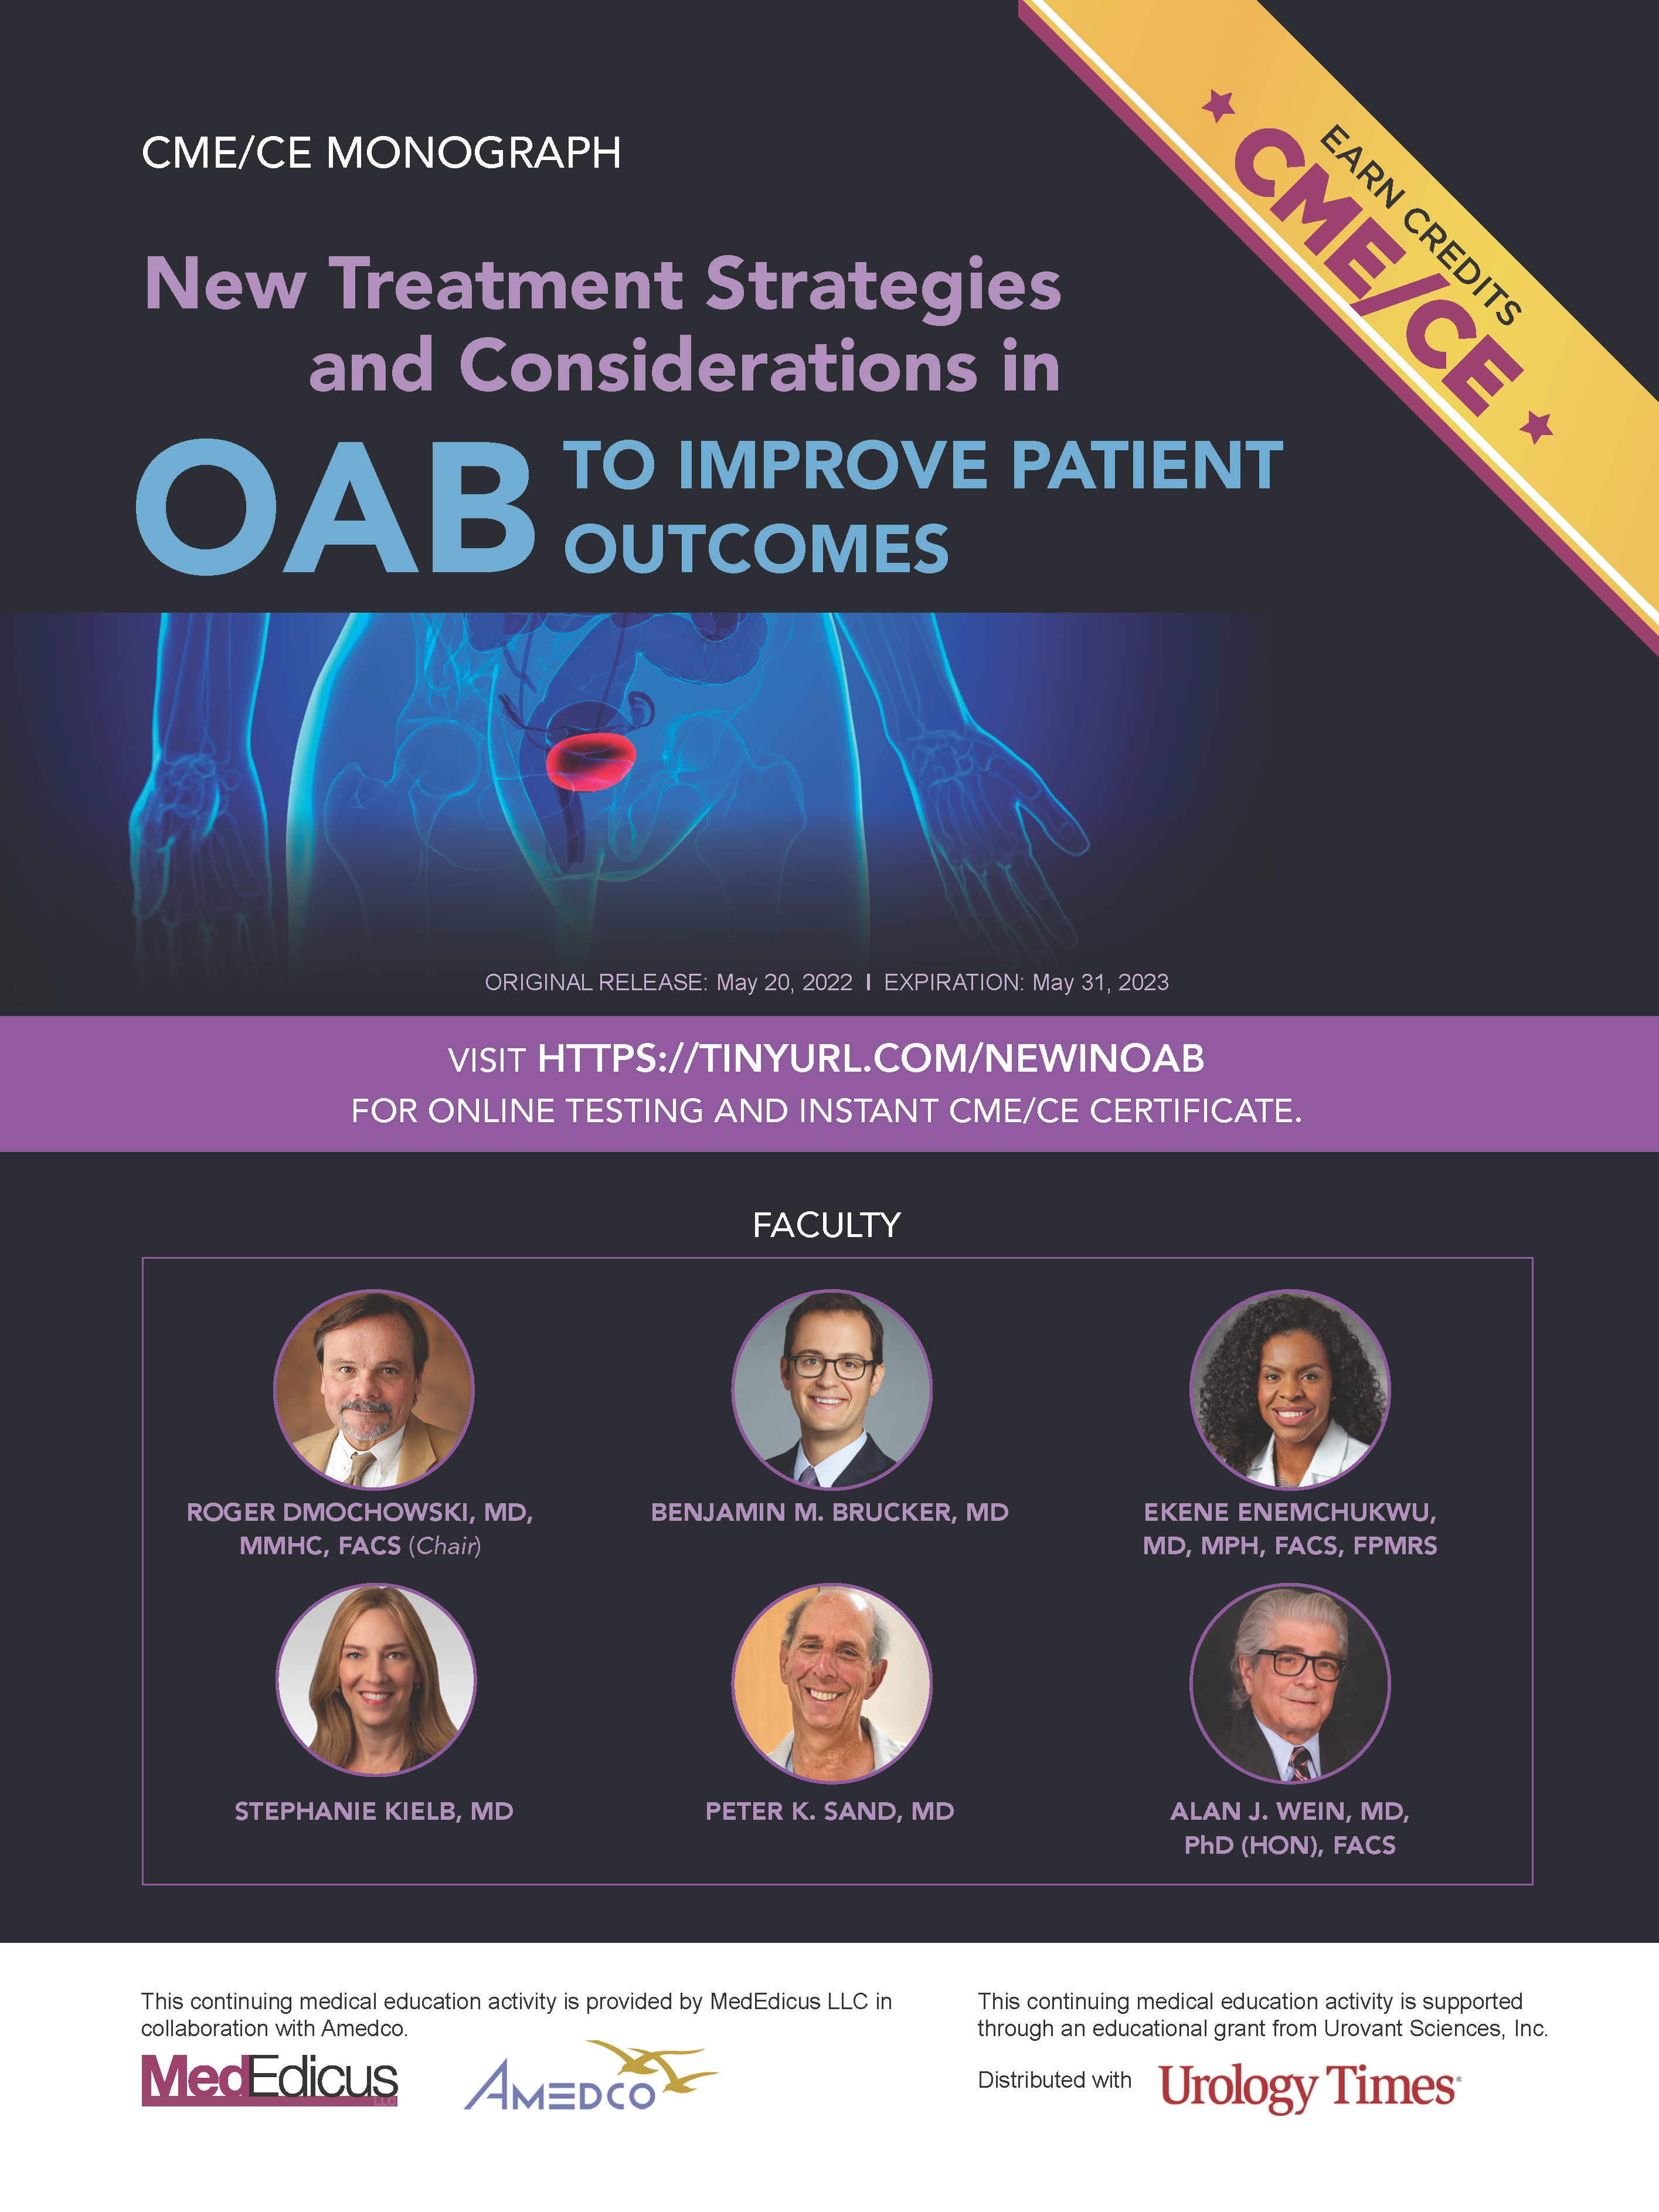 New Treatment Strategies and Considerations in OAB to Improve Patient Outcomes